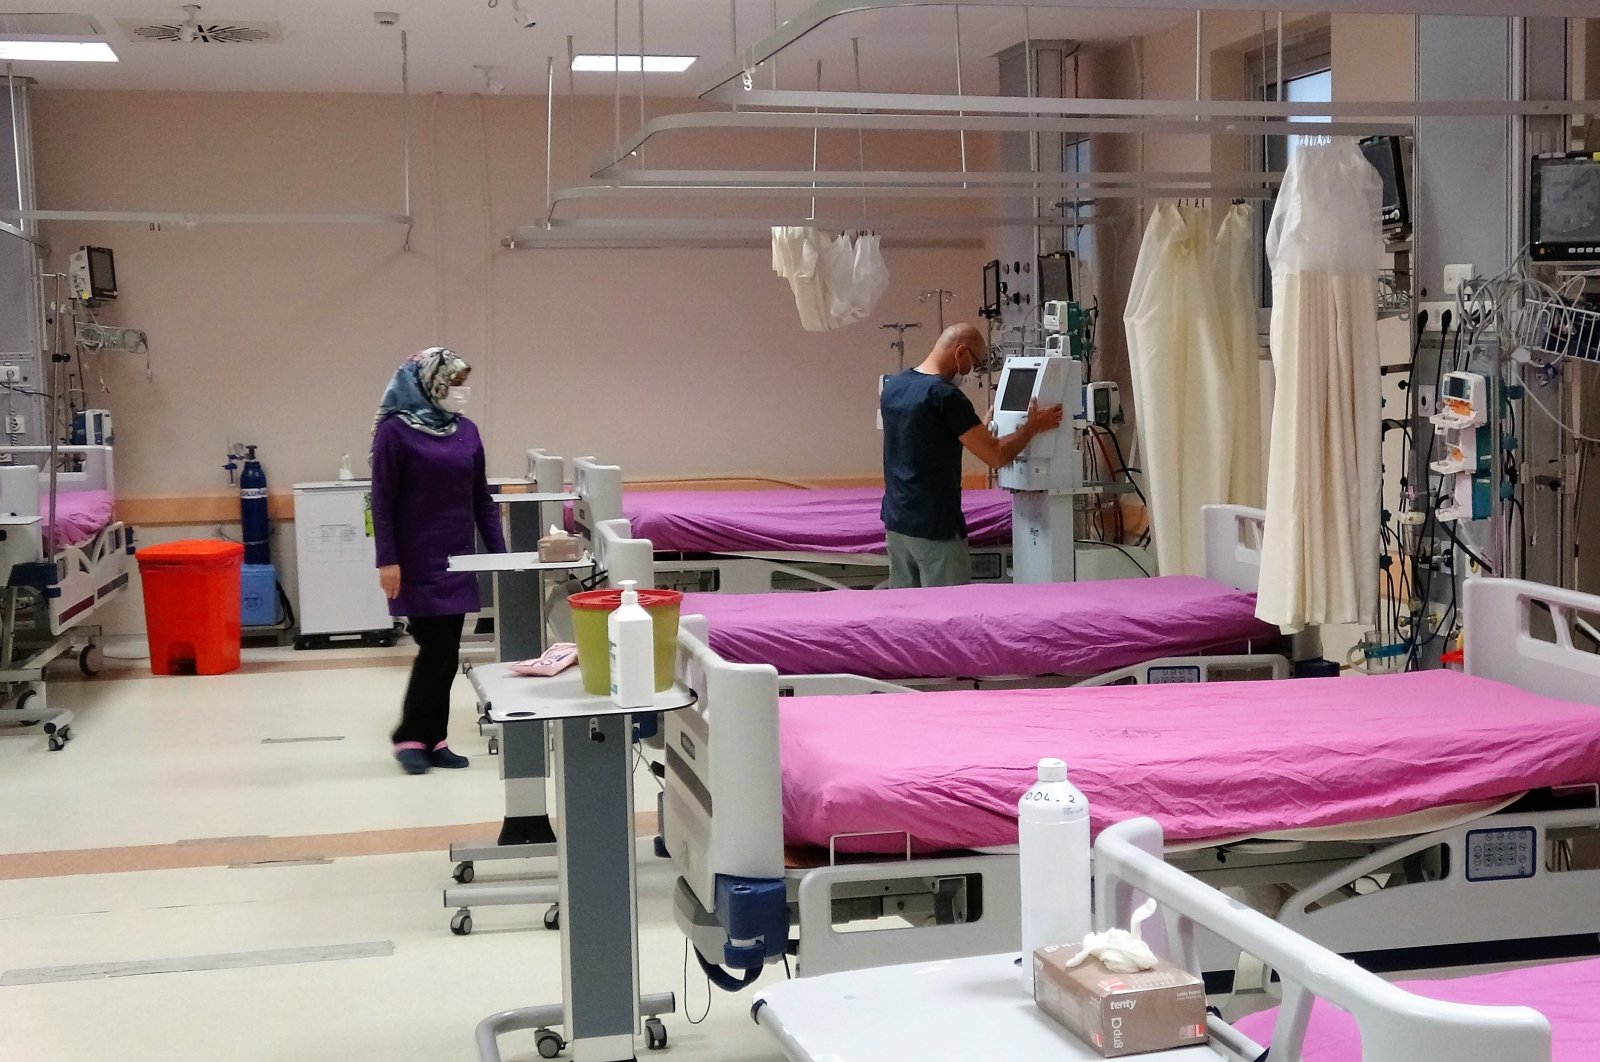 A view of an empty intensive care ward in Tokat, northern Turkey, April 14, 2022. (IHA PHOTO)